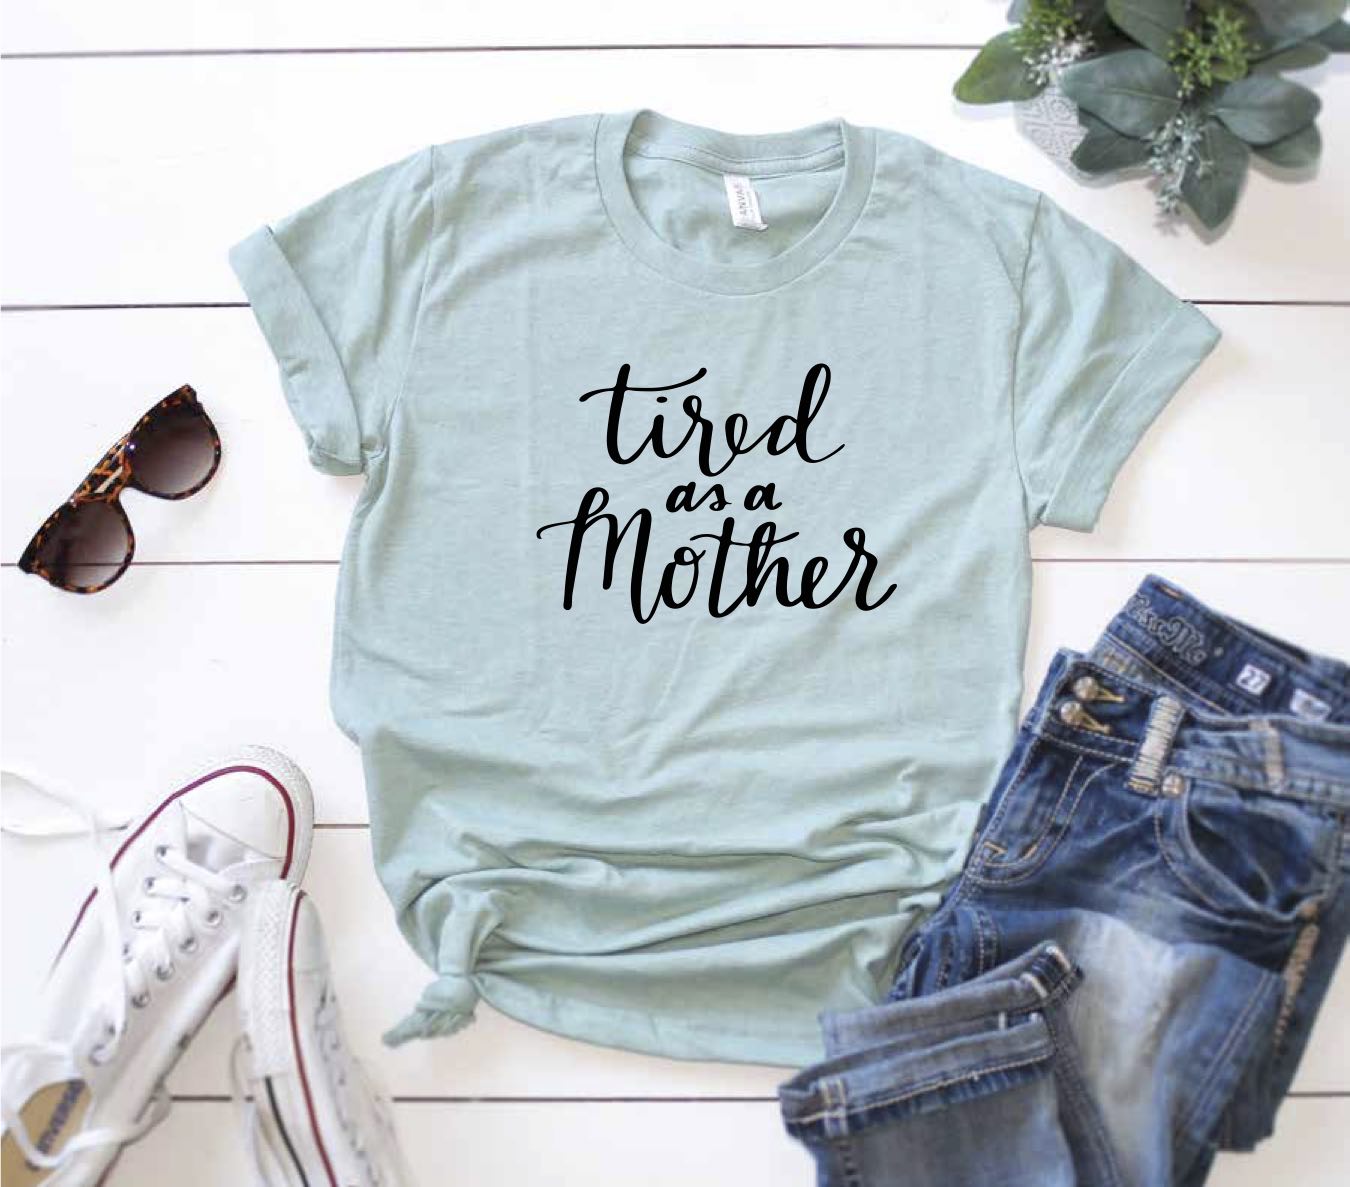 Everyday Party Magazine Tired as a Mother Gift Ideas #DIYGift #Shirt #HandLettered #HandLettering